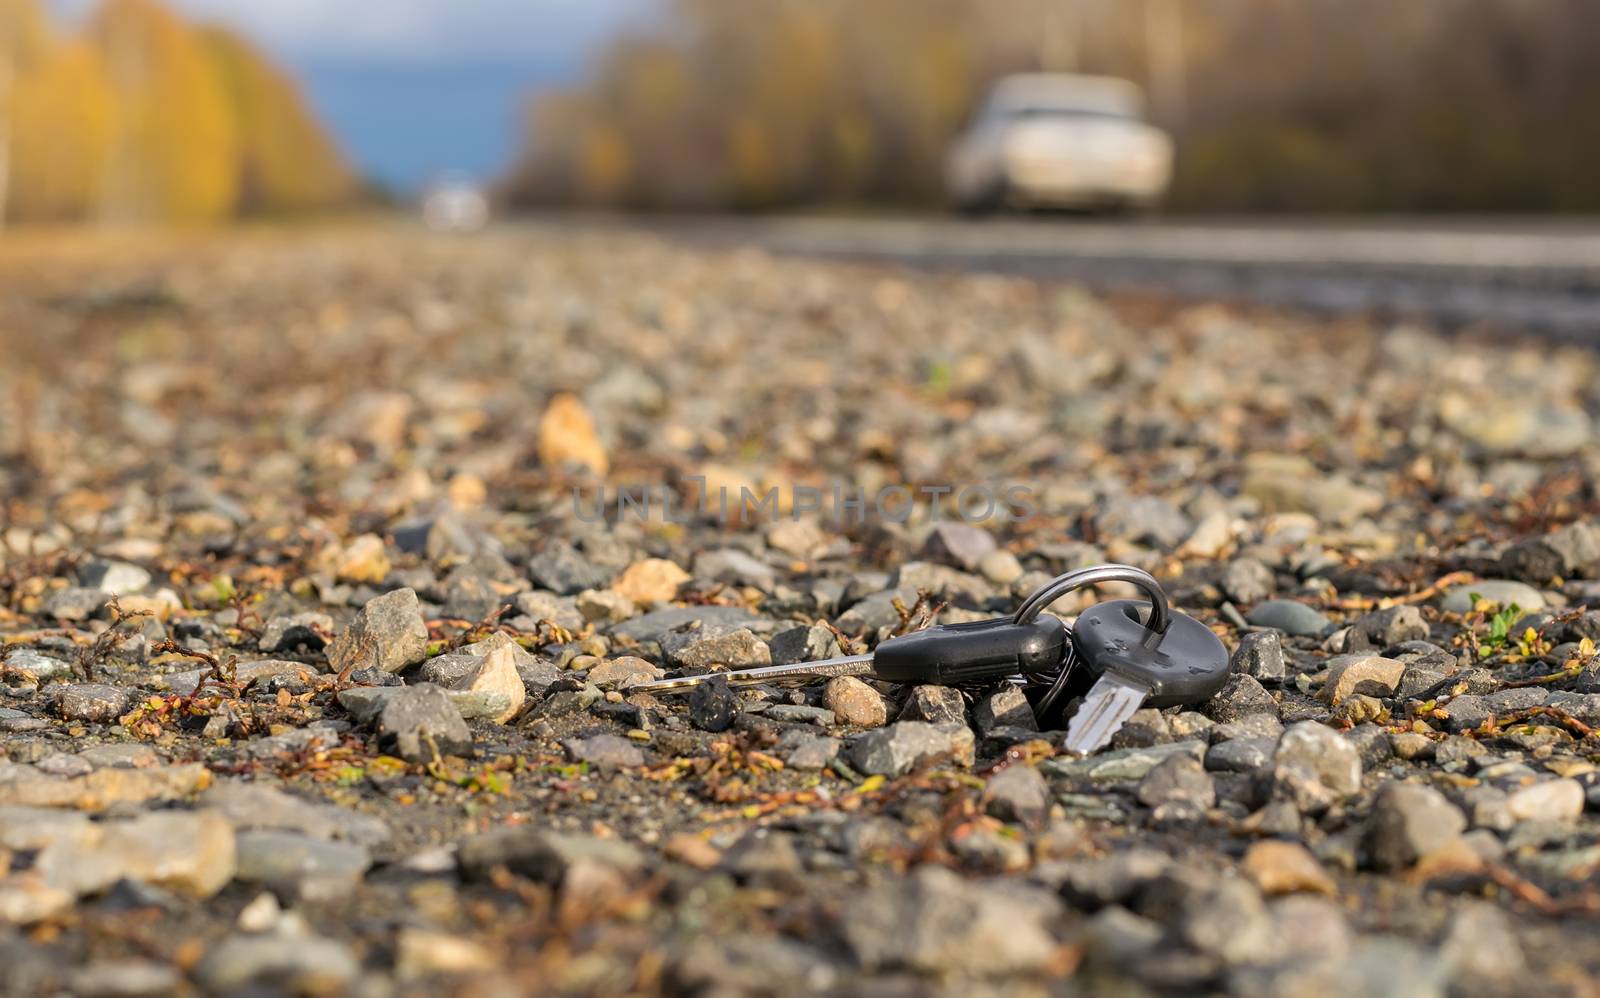 Lost bunch of keys lying on the side of the road near the asphalt pavement of the roadway